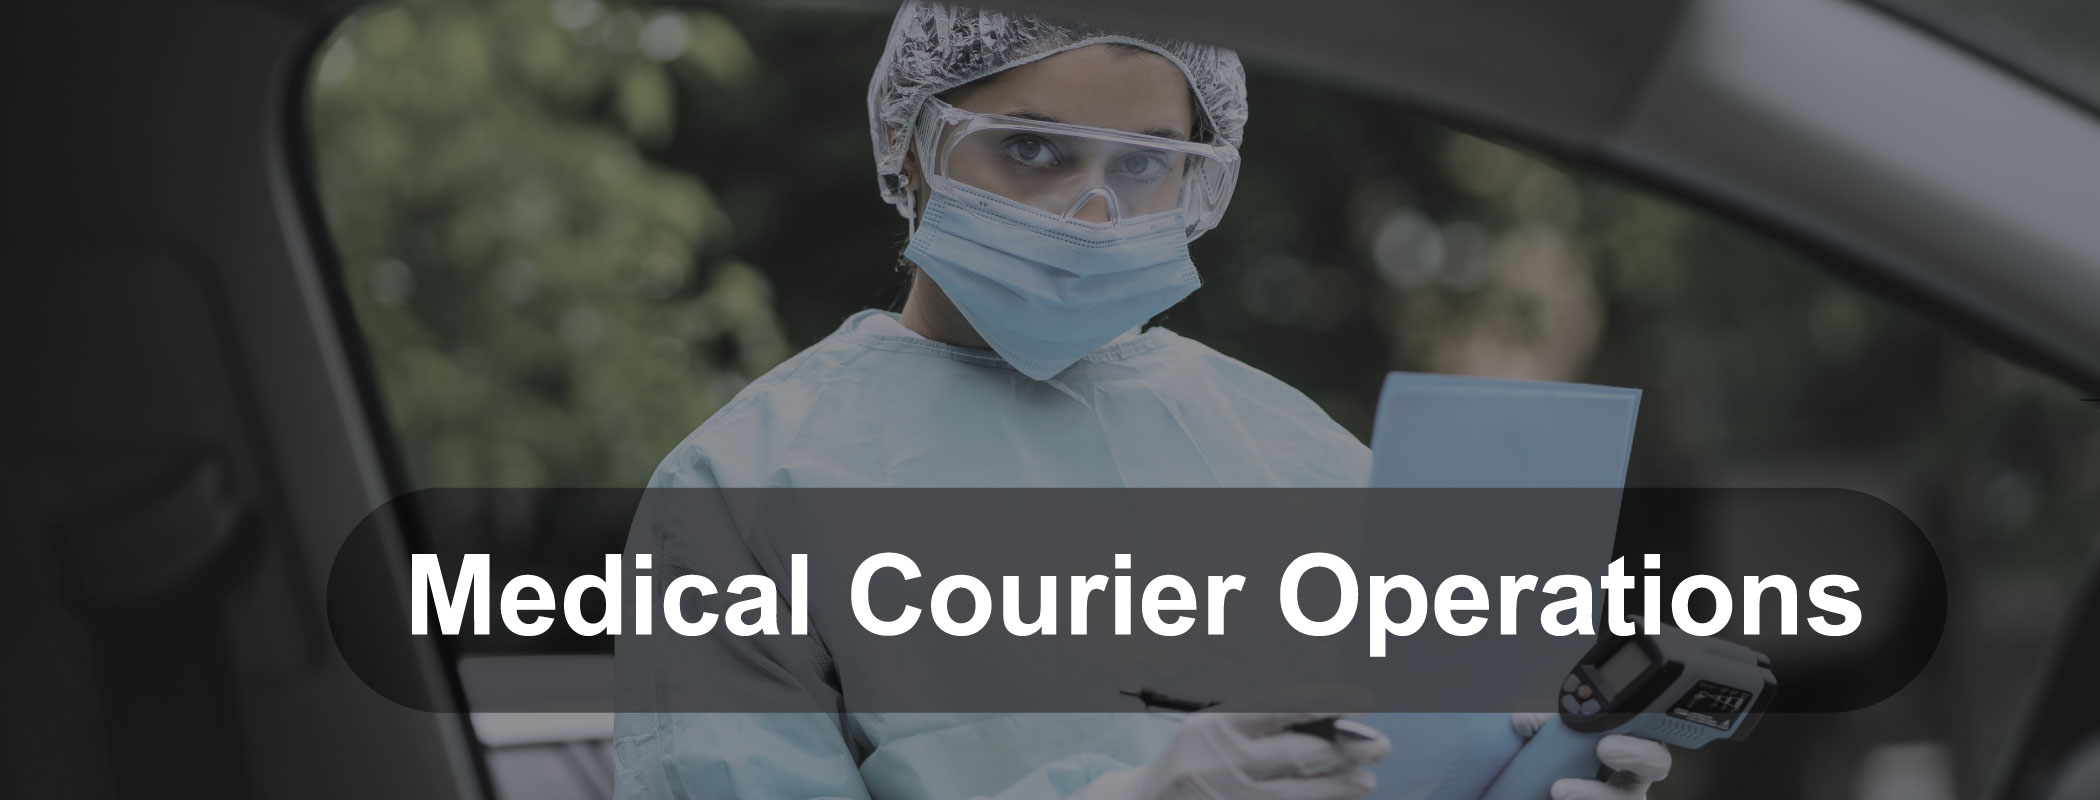 Cover-photo-for-Blog---Medical-Courier-Operations-02